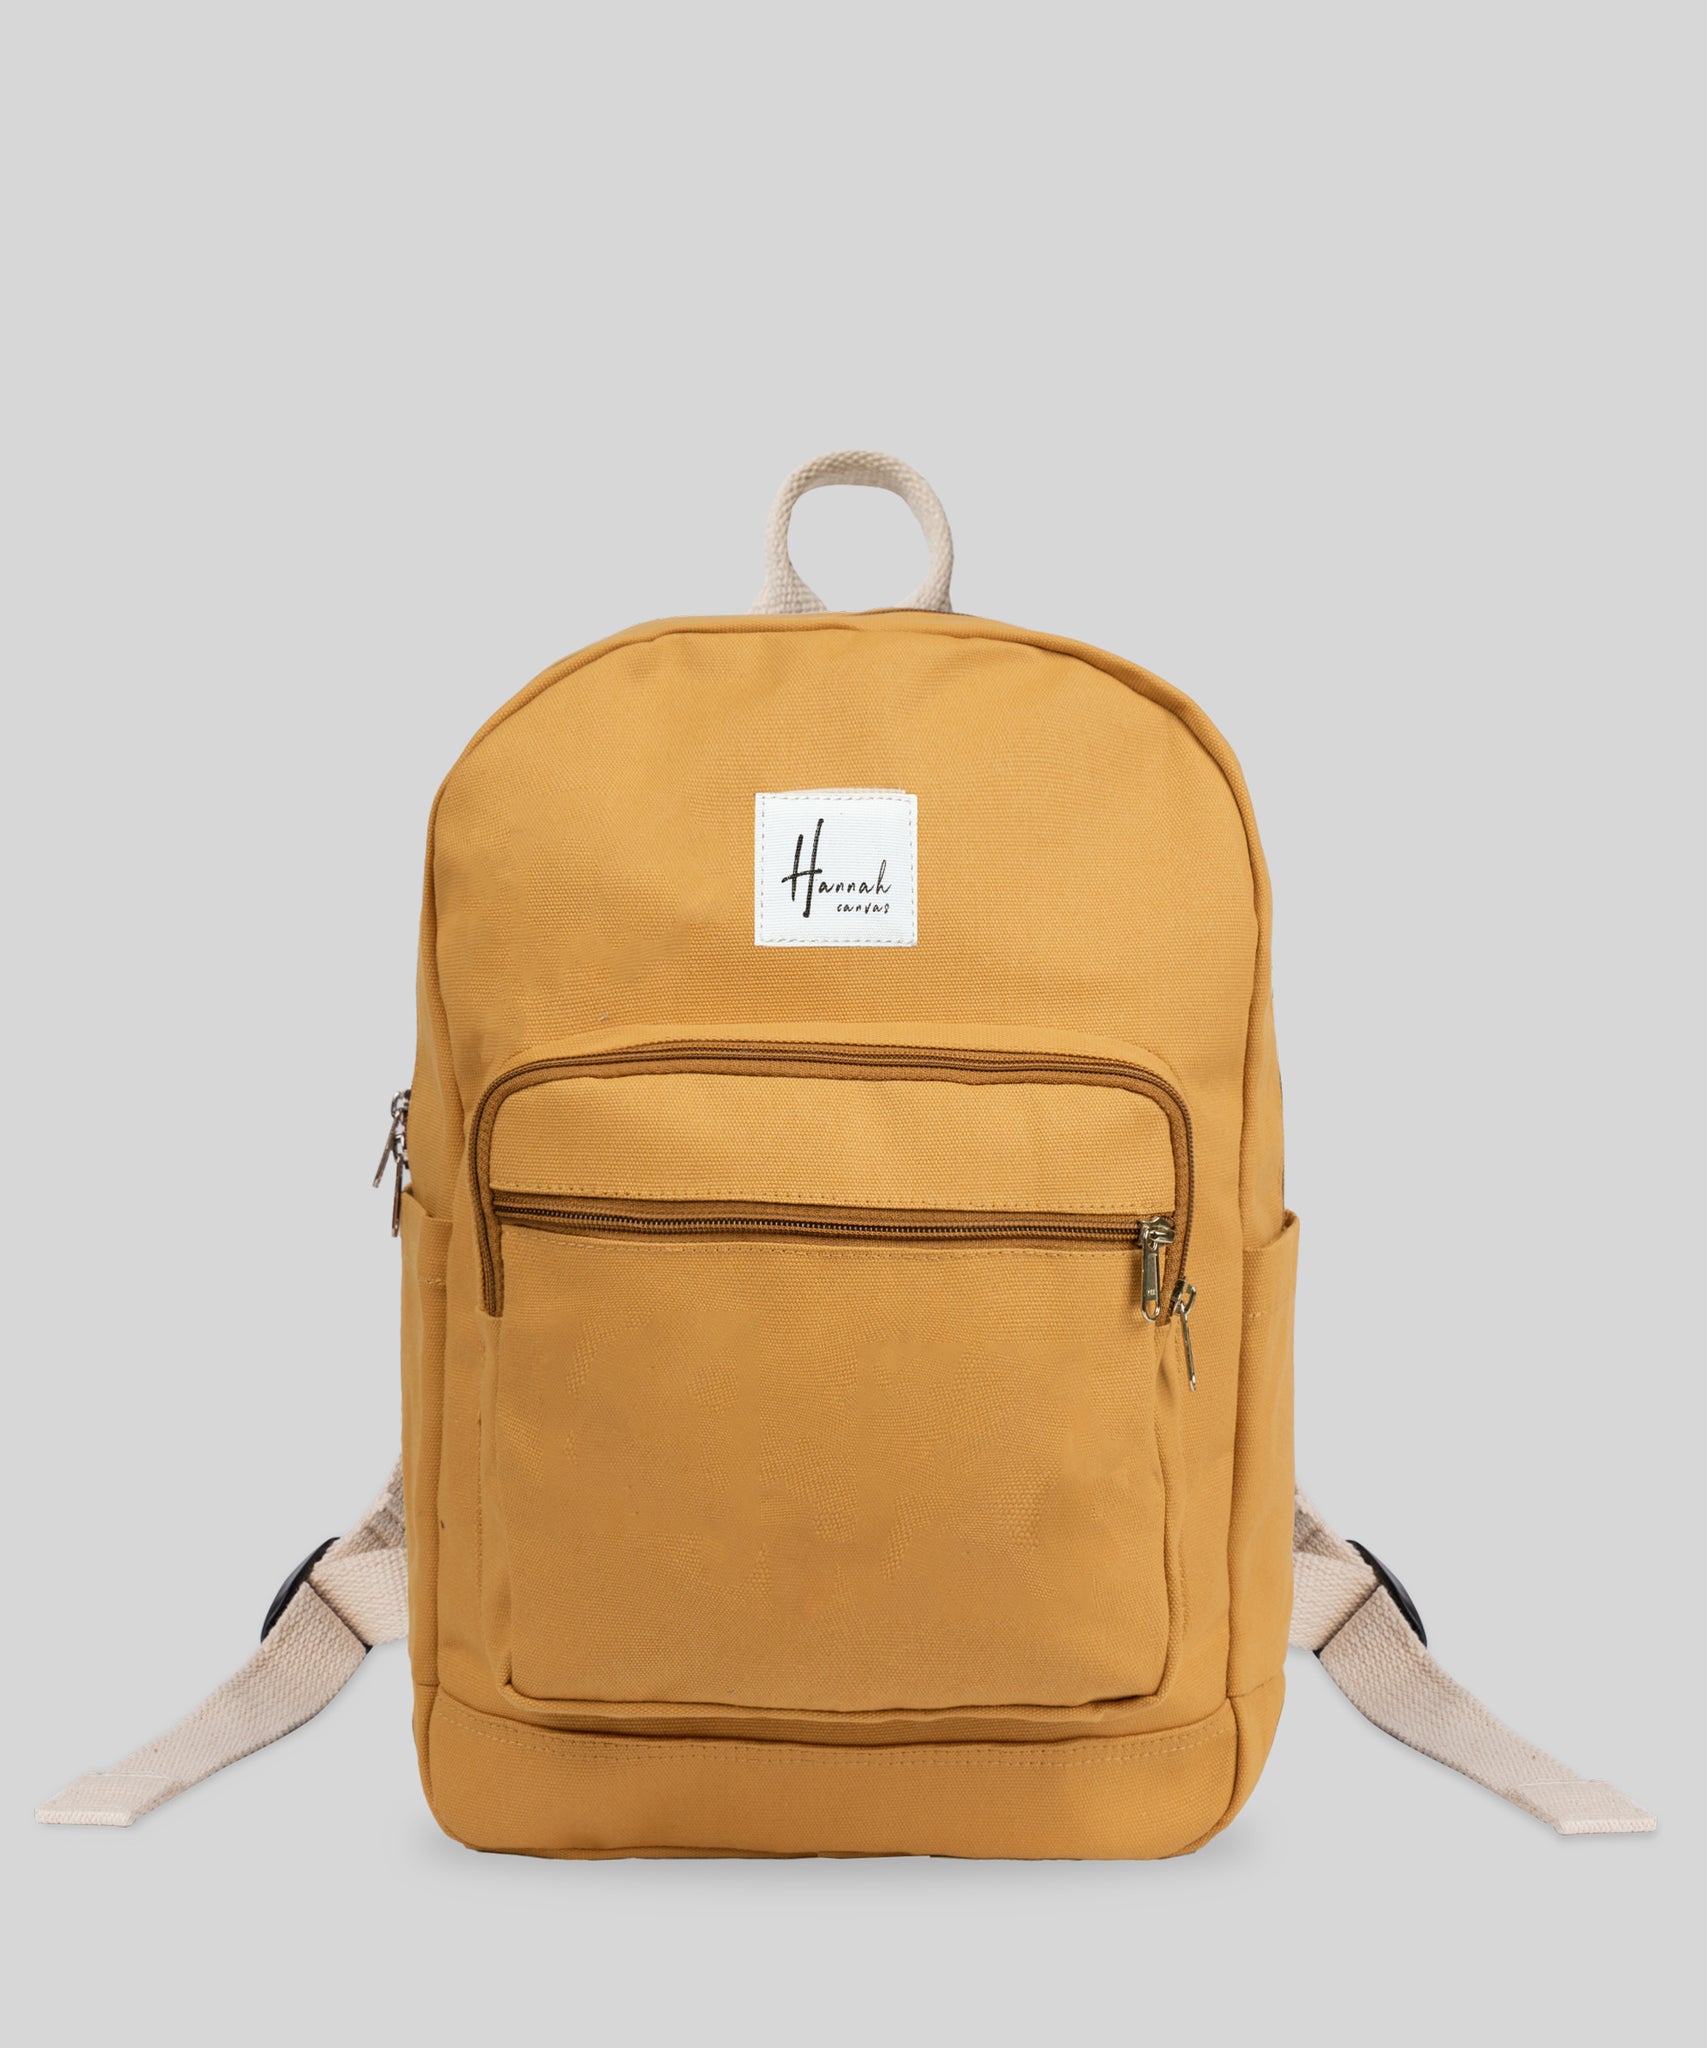 MomsyStore Medium Backpack Purse for Women Convertible Travel Vintage 24 L Backpack  Yellow - Price in India | Flipkart.com